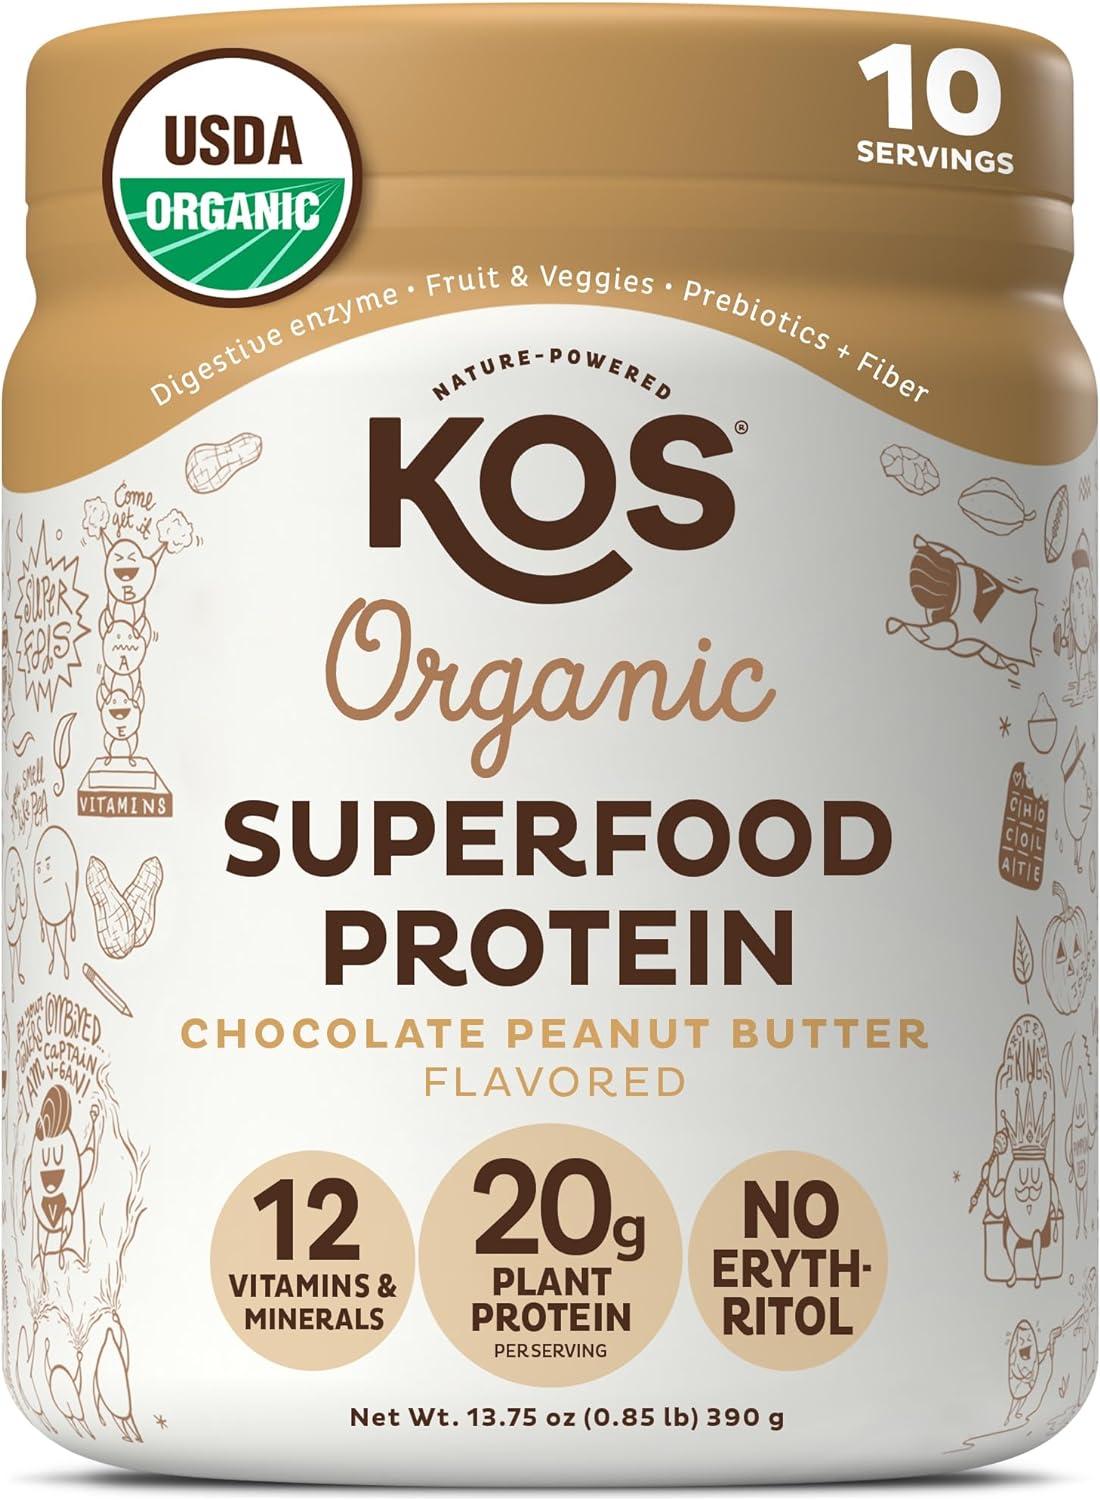 KOS Vegan Protein Powder, Chocolate Peanut Butter - Low Carb Pea Protein Blend, USDA Organic Superfood with Vitamins & Minerals - Keto, Soy, Dairy Free - Meal Replacement for Women & Men - 10 Servings